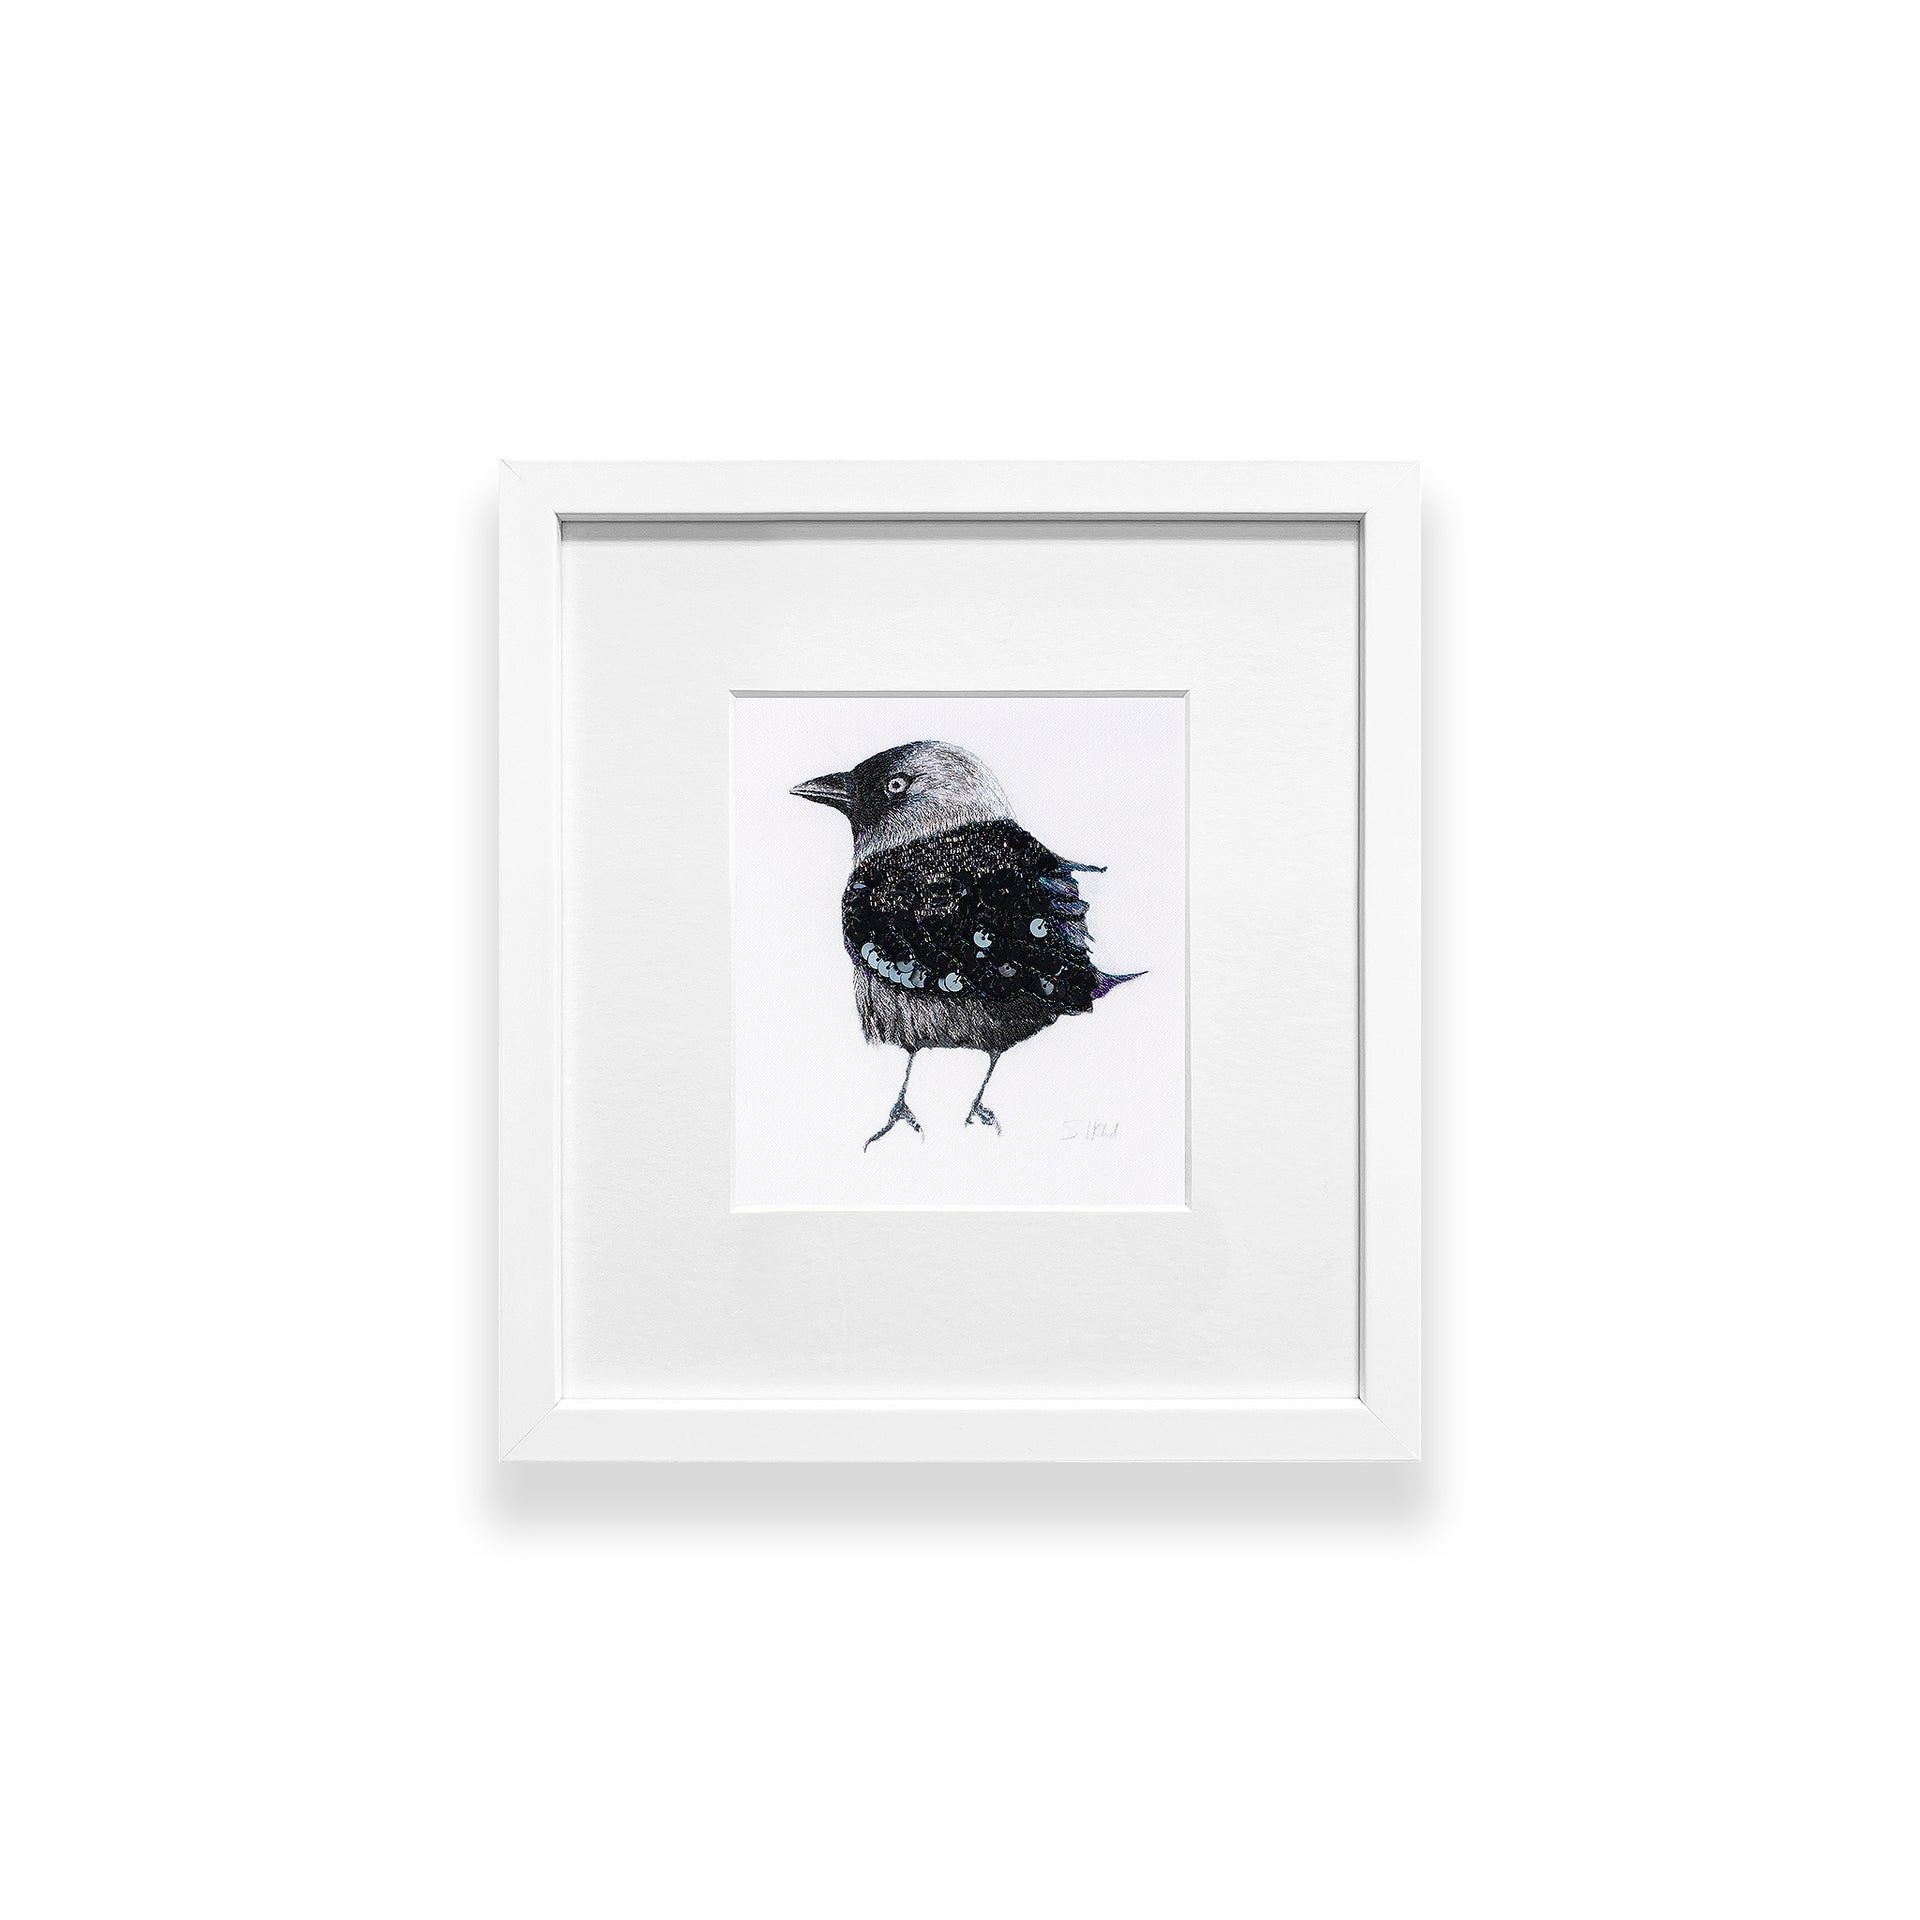 Original hand embroidered, bead and sequinned bird artwork in white frame